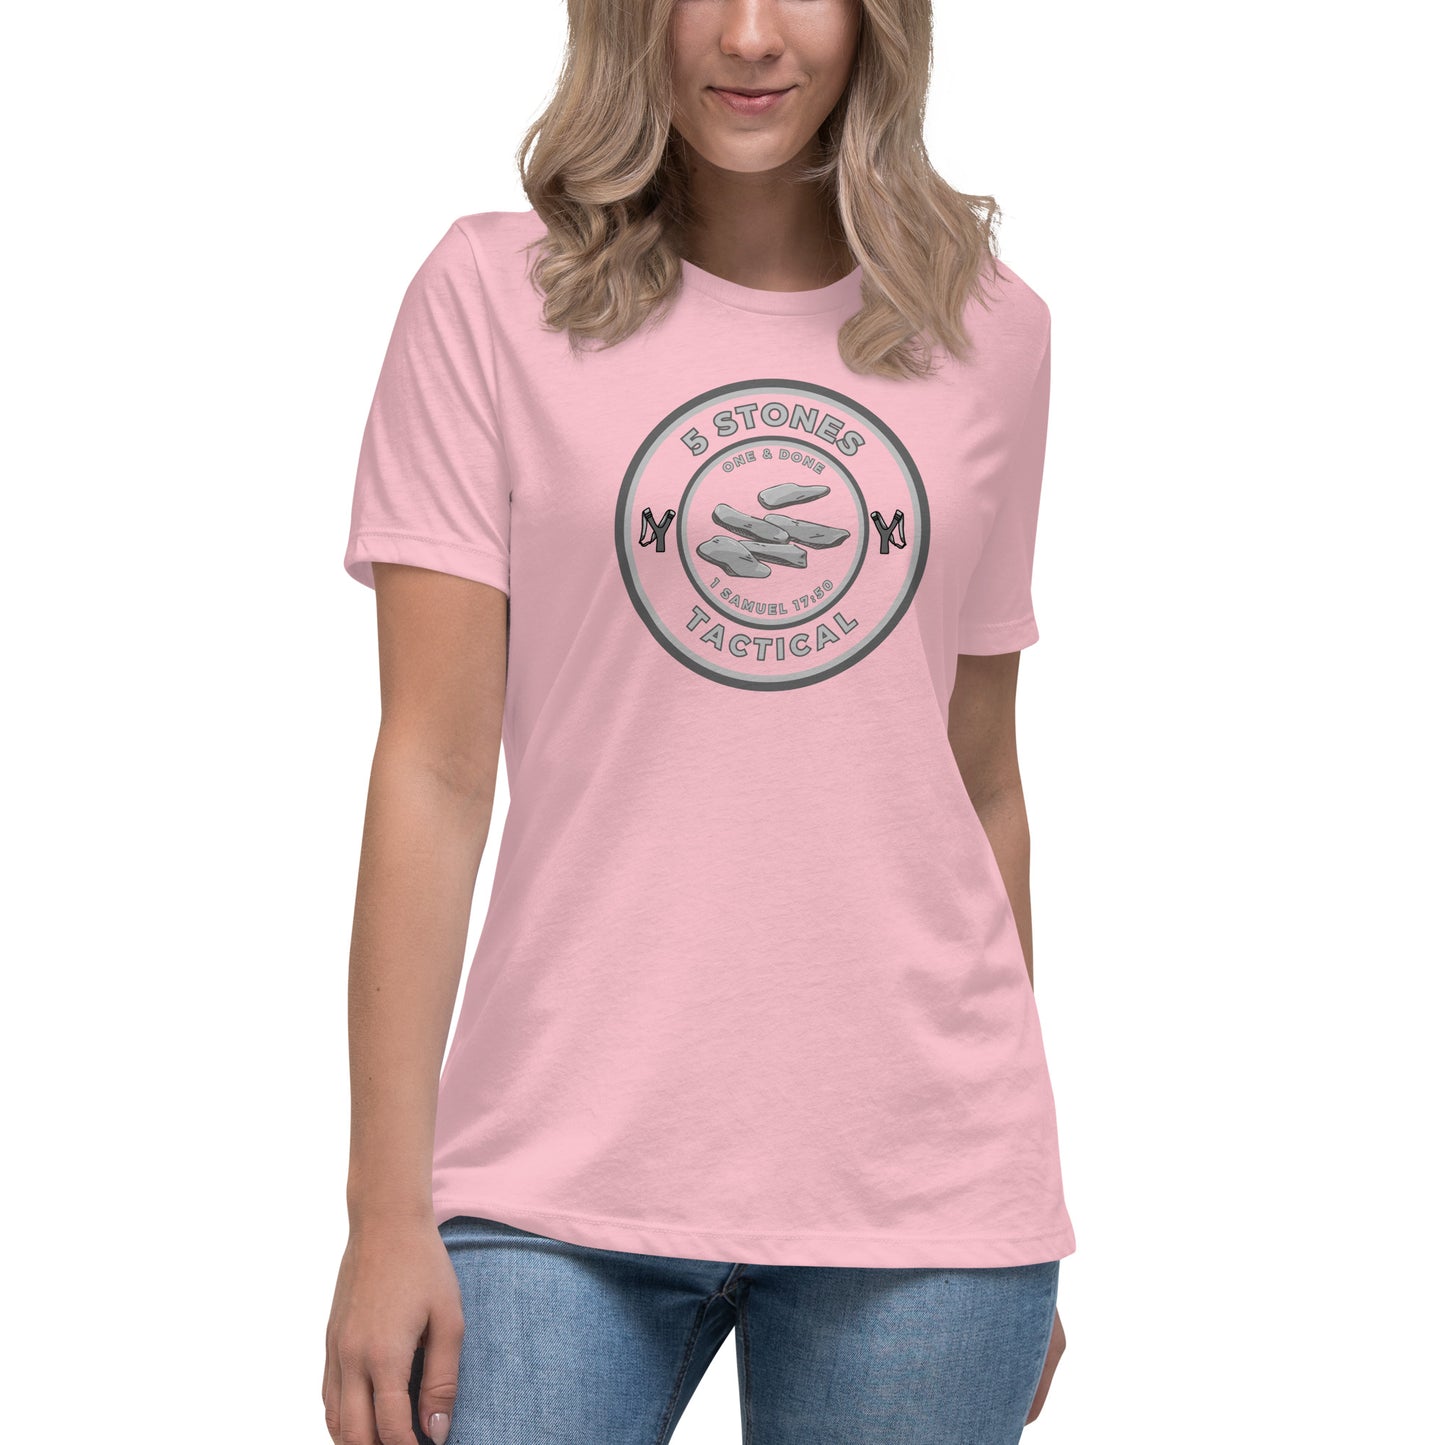 5 Stones Tactical 1 Samuel 17:50 One & Done Women's Relaxed T-Shirt